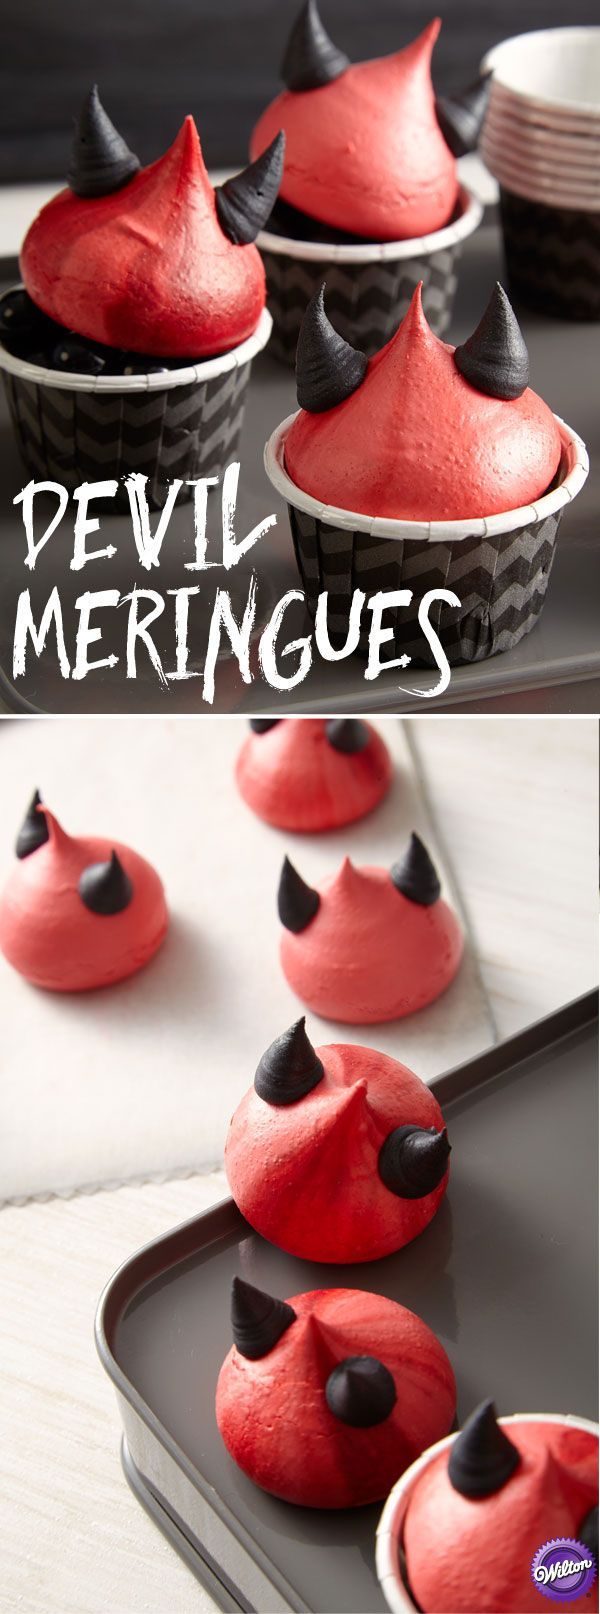 Devilishly clever cookies complete with horns give any Halloween celebration a sli